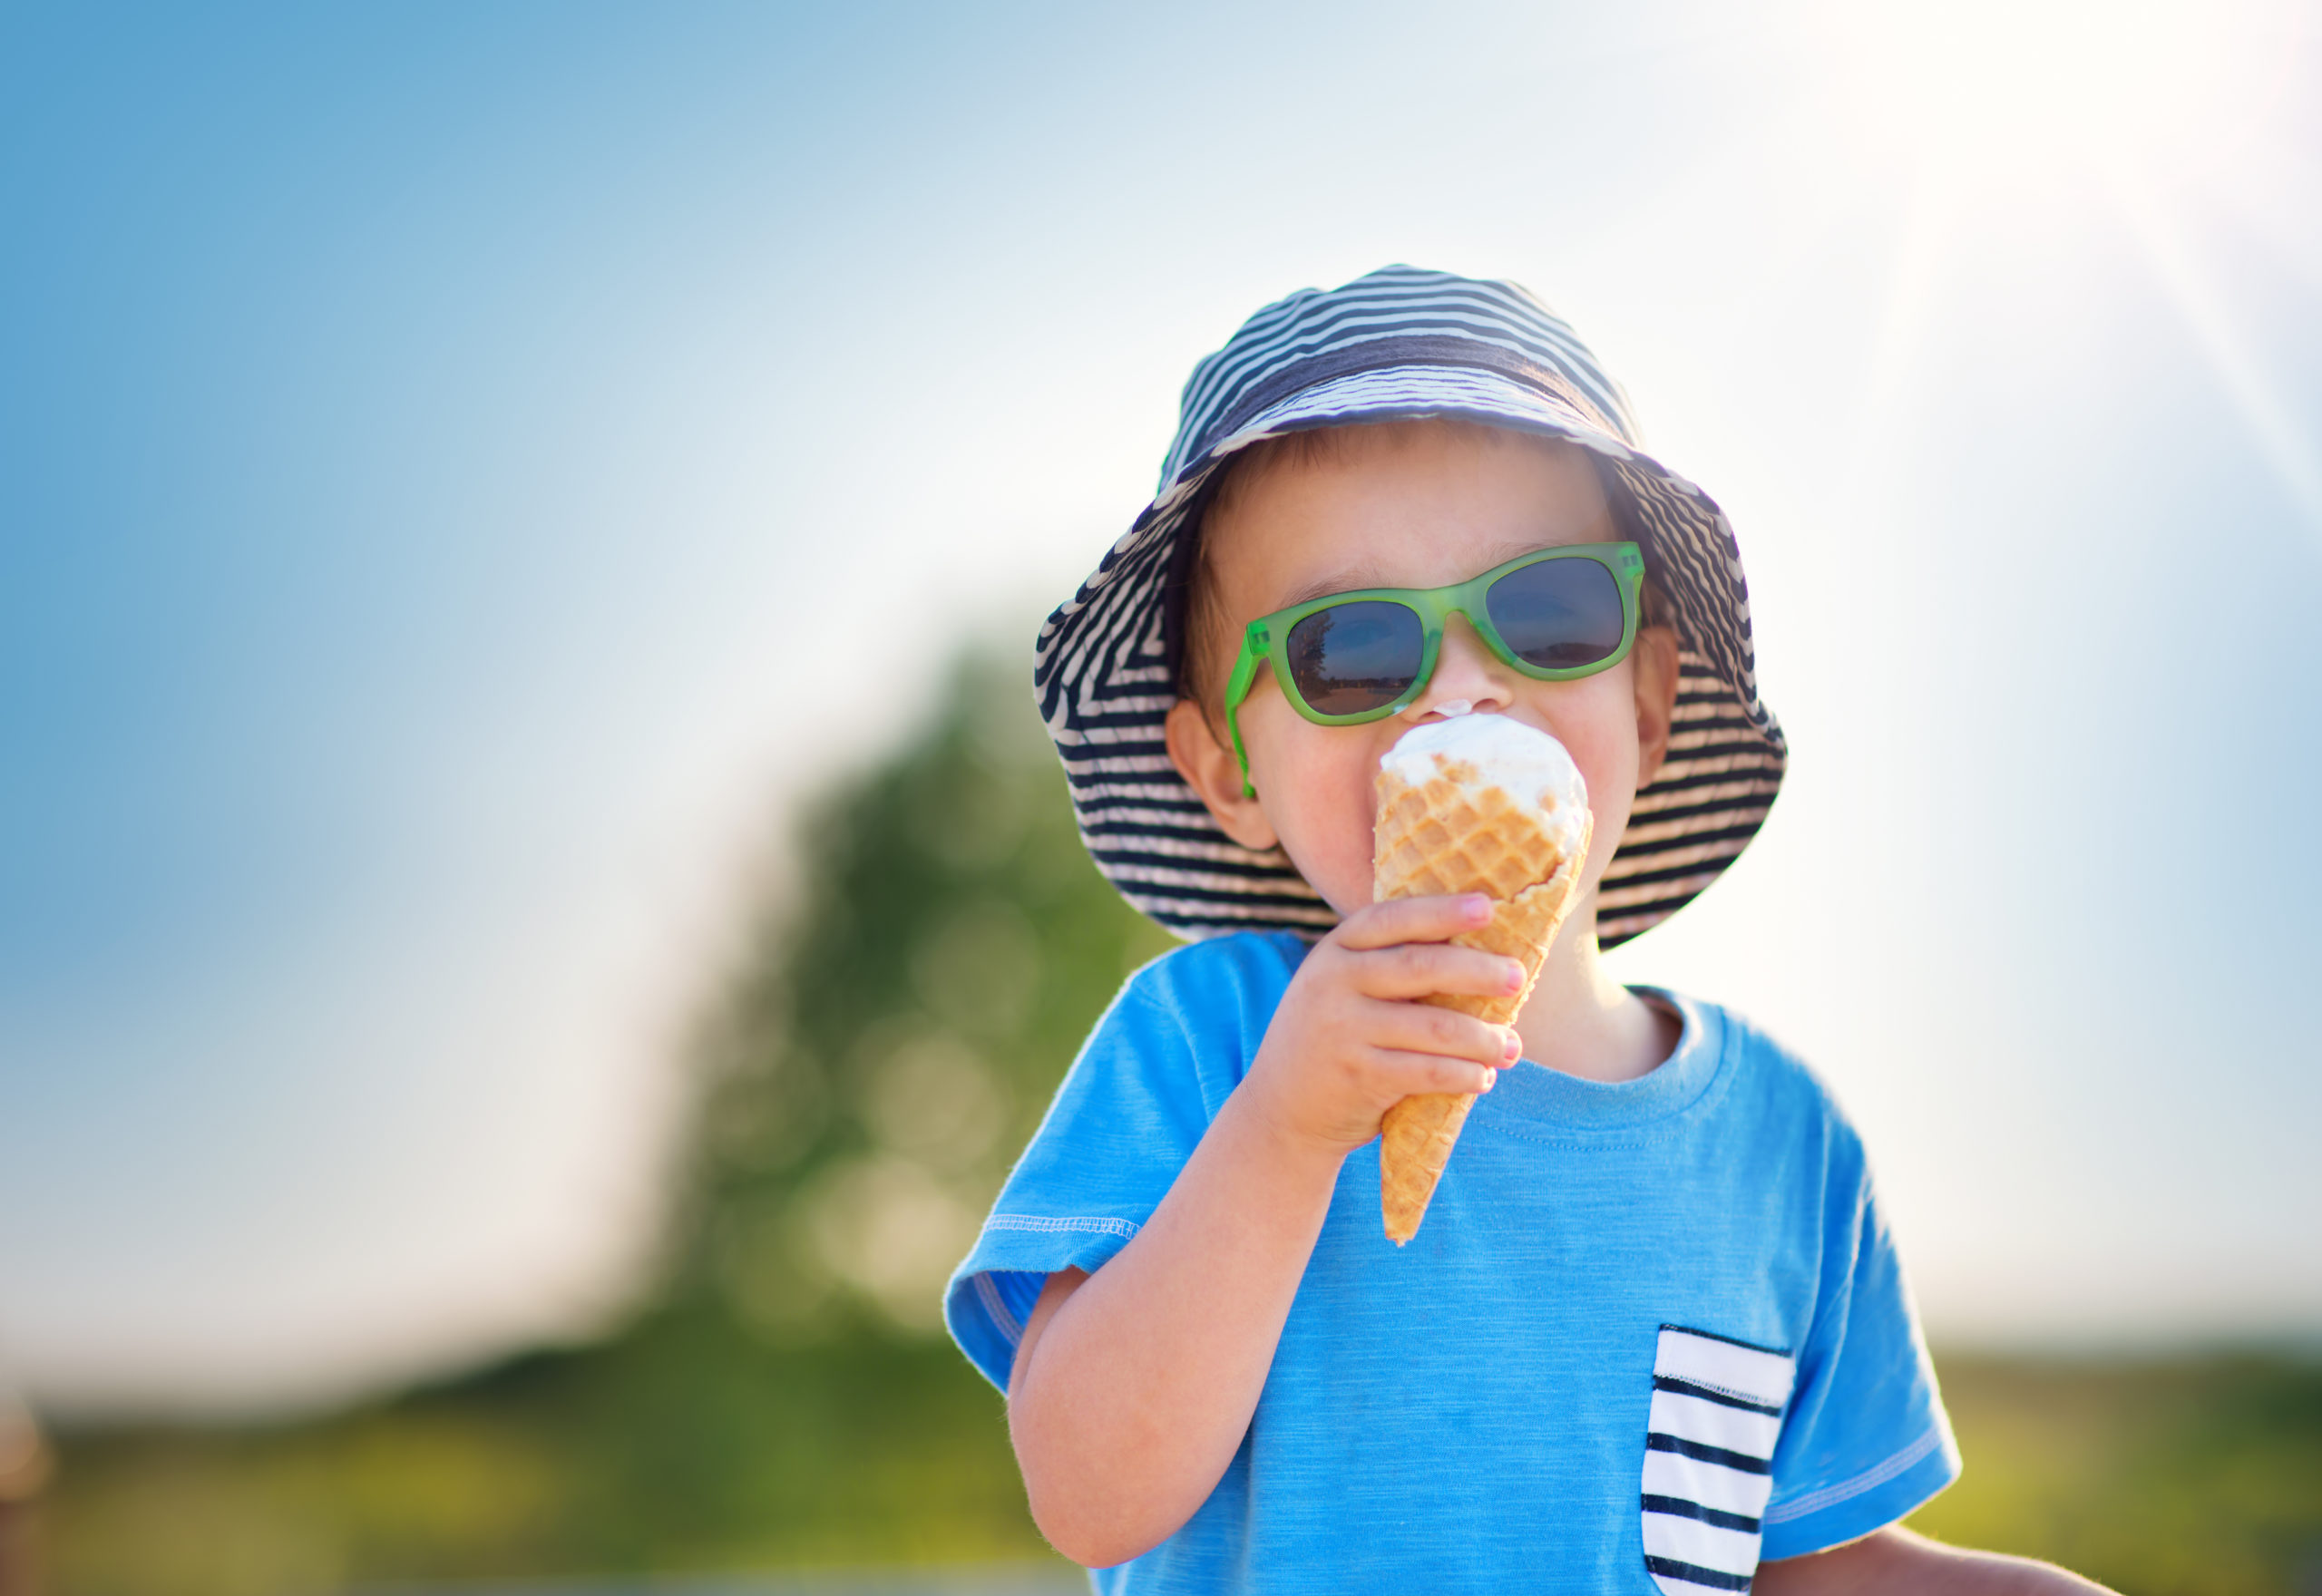 Read more about the article Family Fun: Ice Cream in a Bag